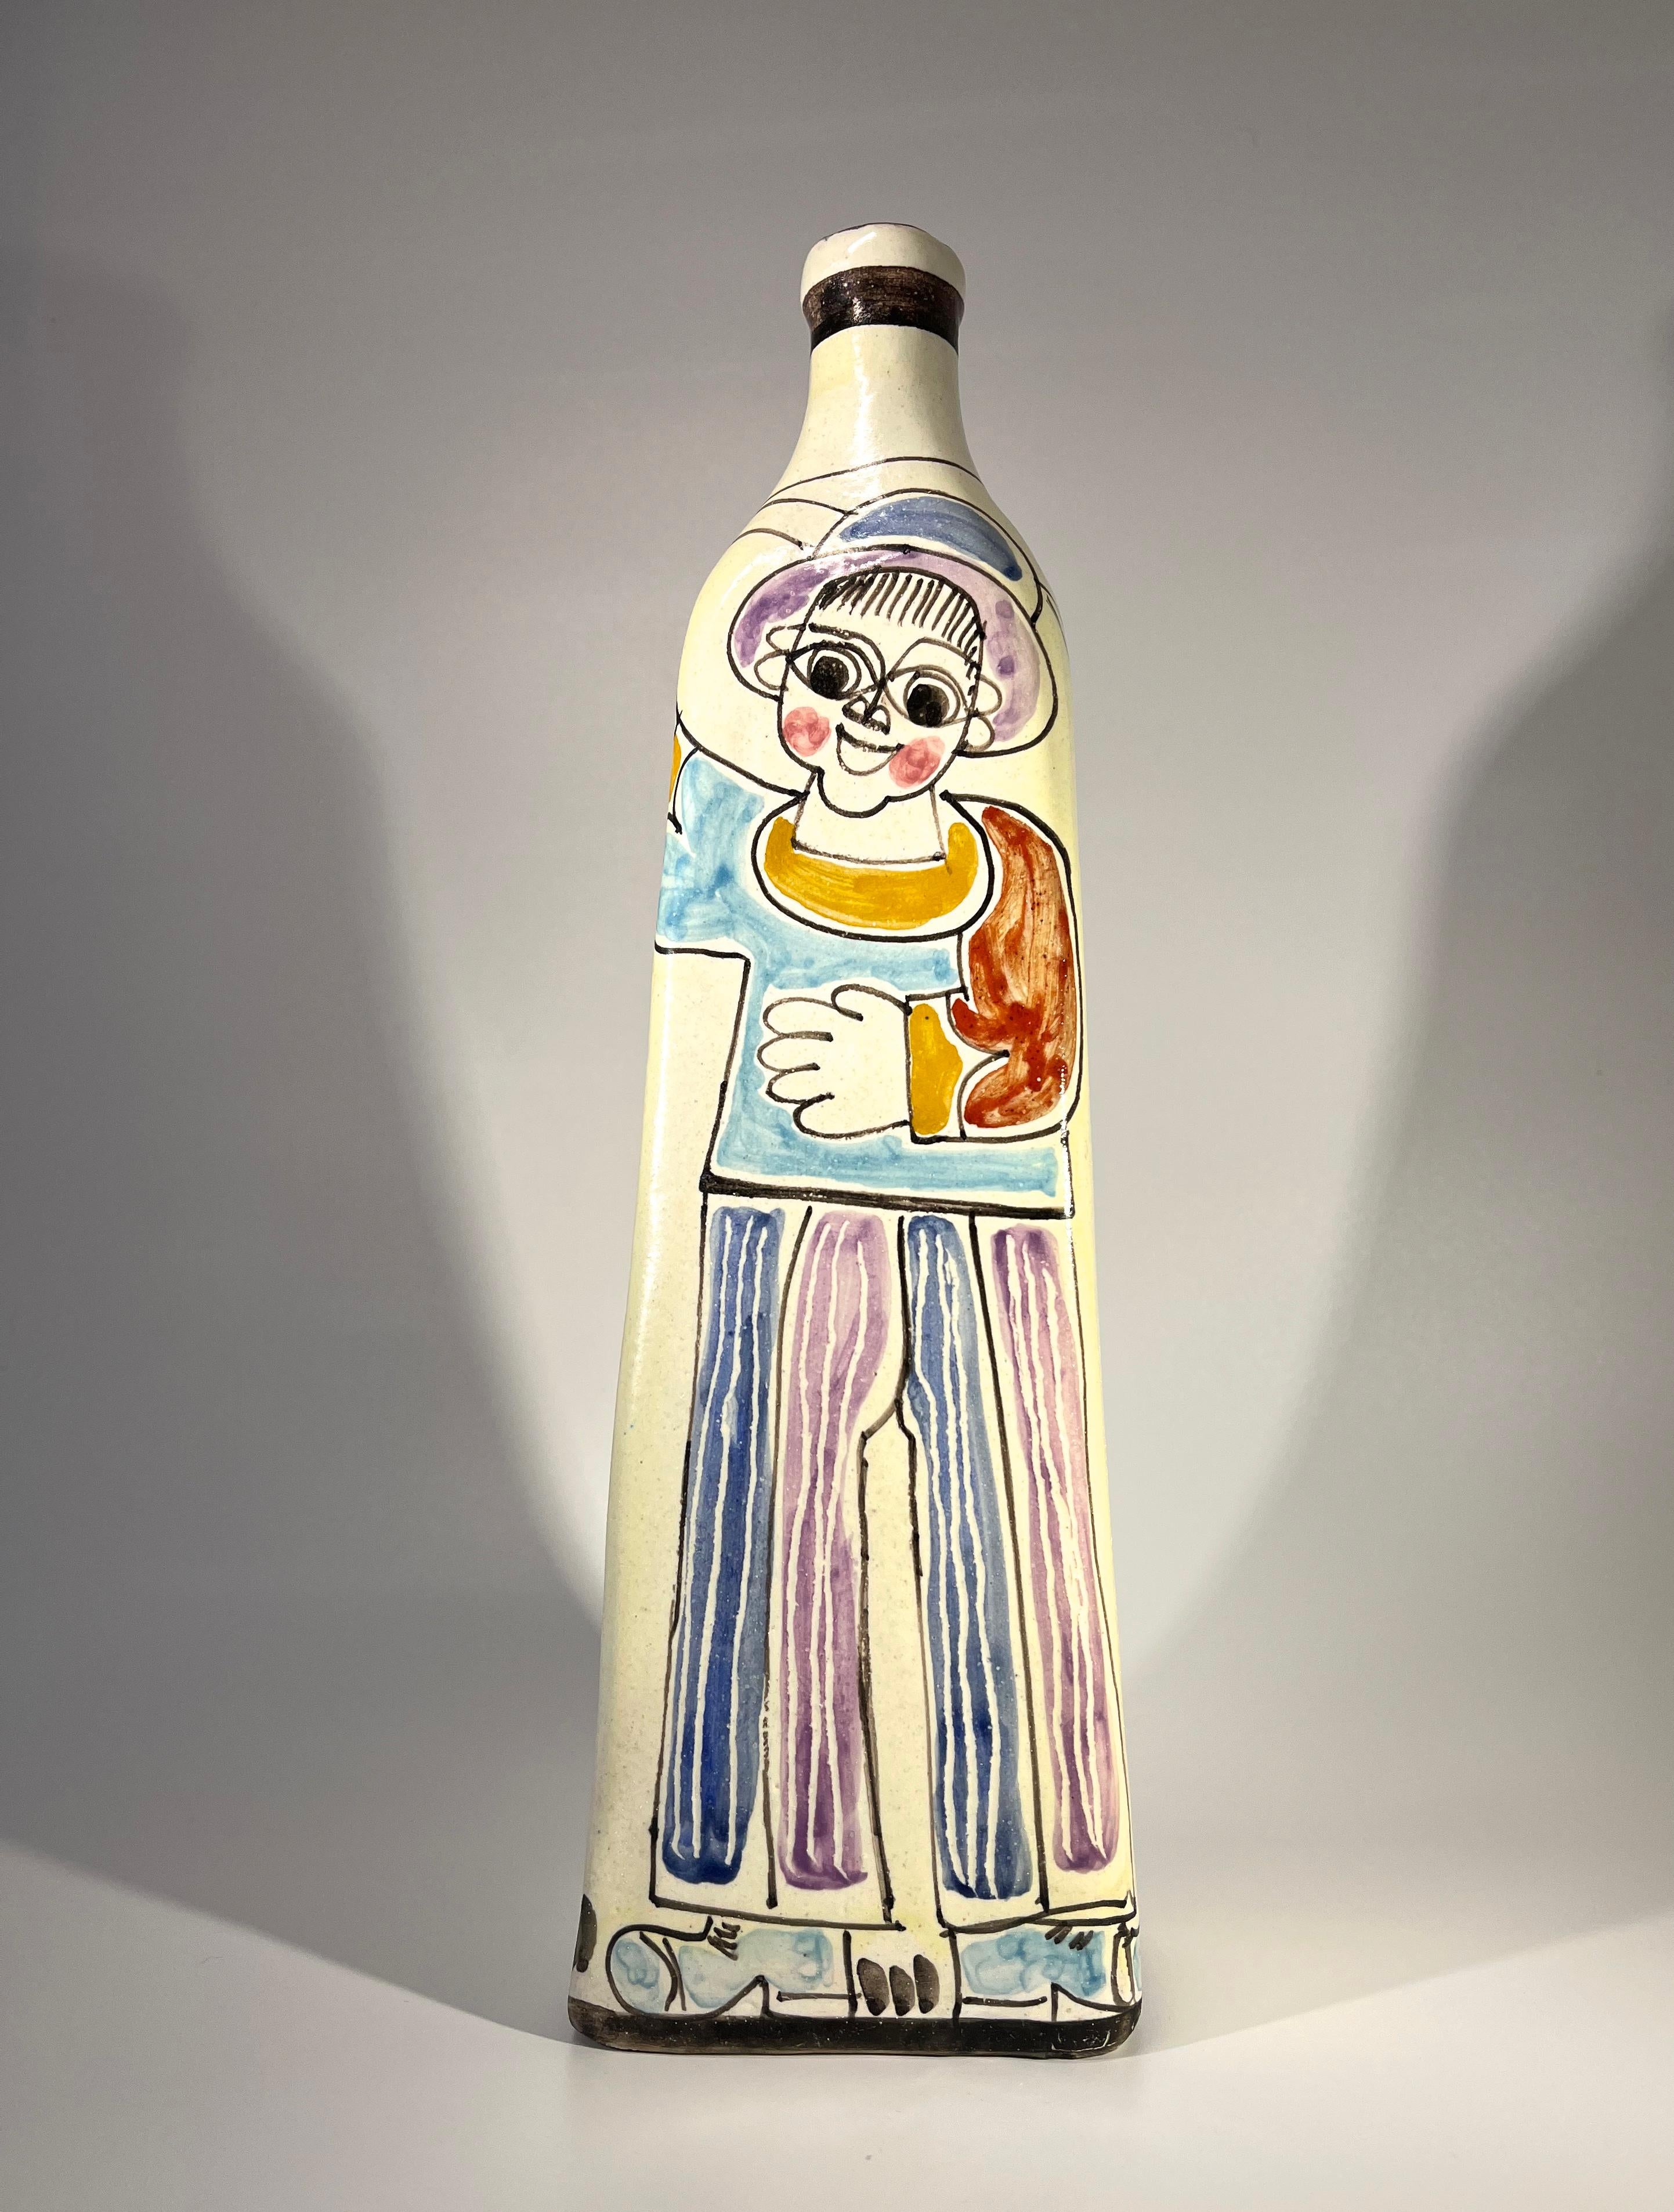 Jolly DeSimone 'Boy With Balloons' tall Italian ceramic bottle vase from the 1960's
Hand painted in typical entertaining DeSimone style
A 12 inch tall piece
Signed DeSimone Italy on the base
Circa 1960
Height 12 inch, Width 3.75 inch, Depth 2.5
In